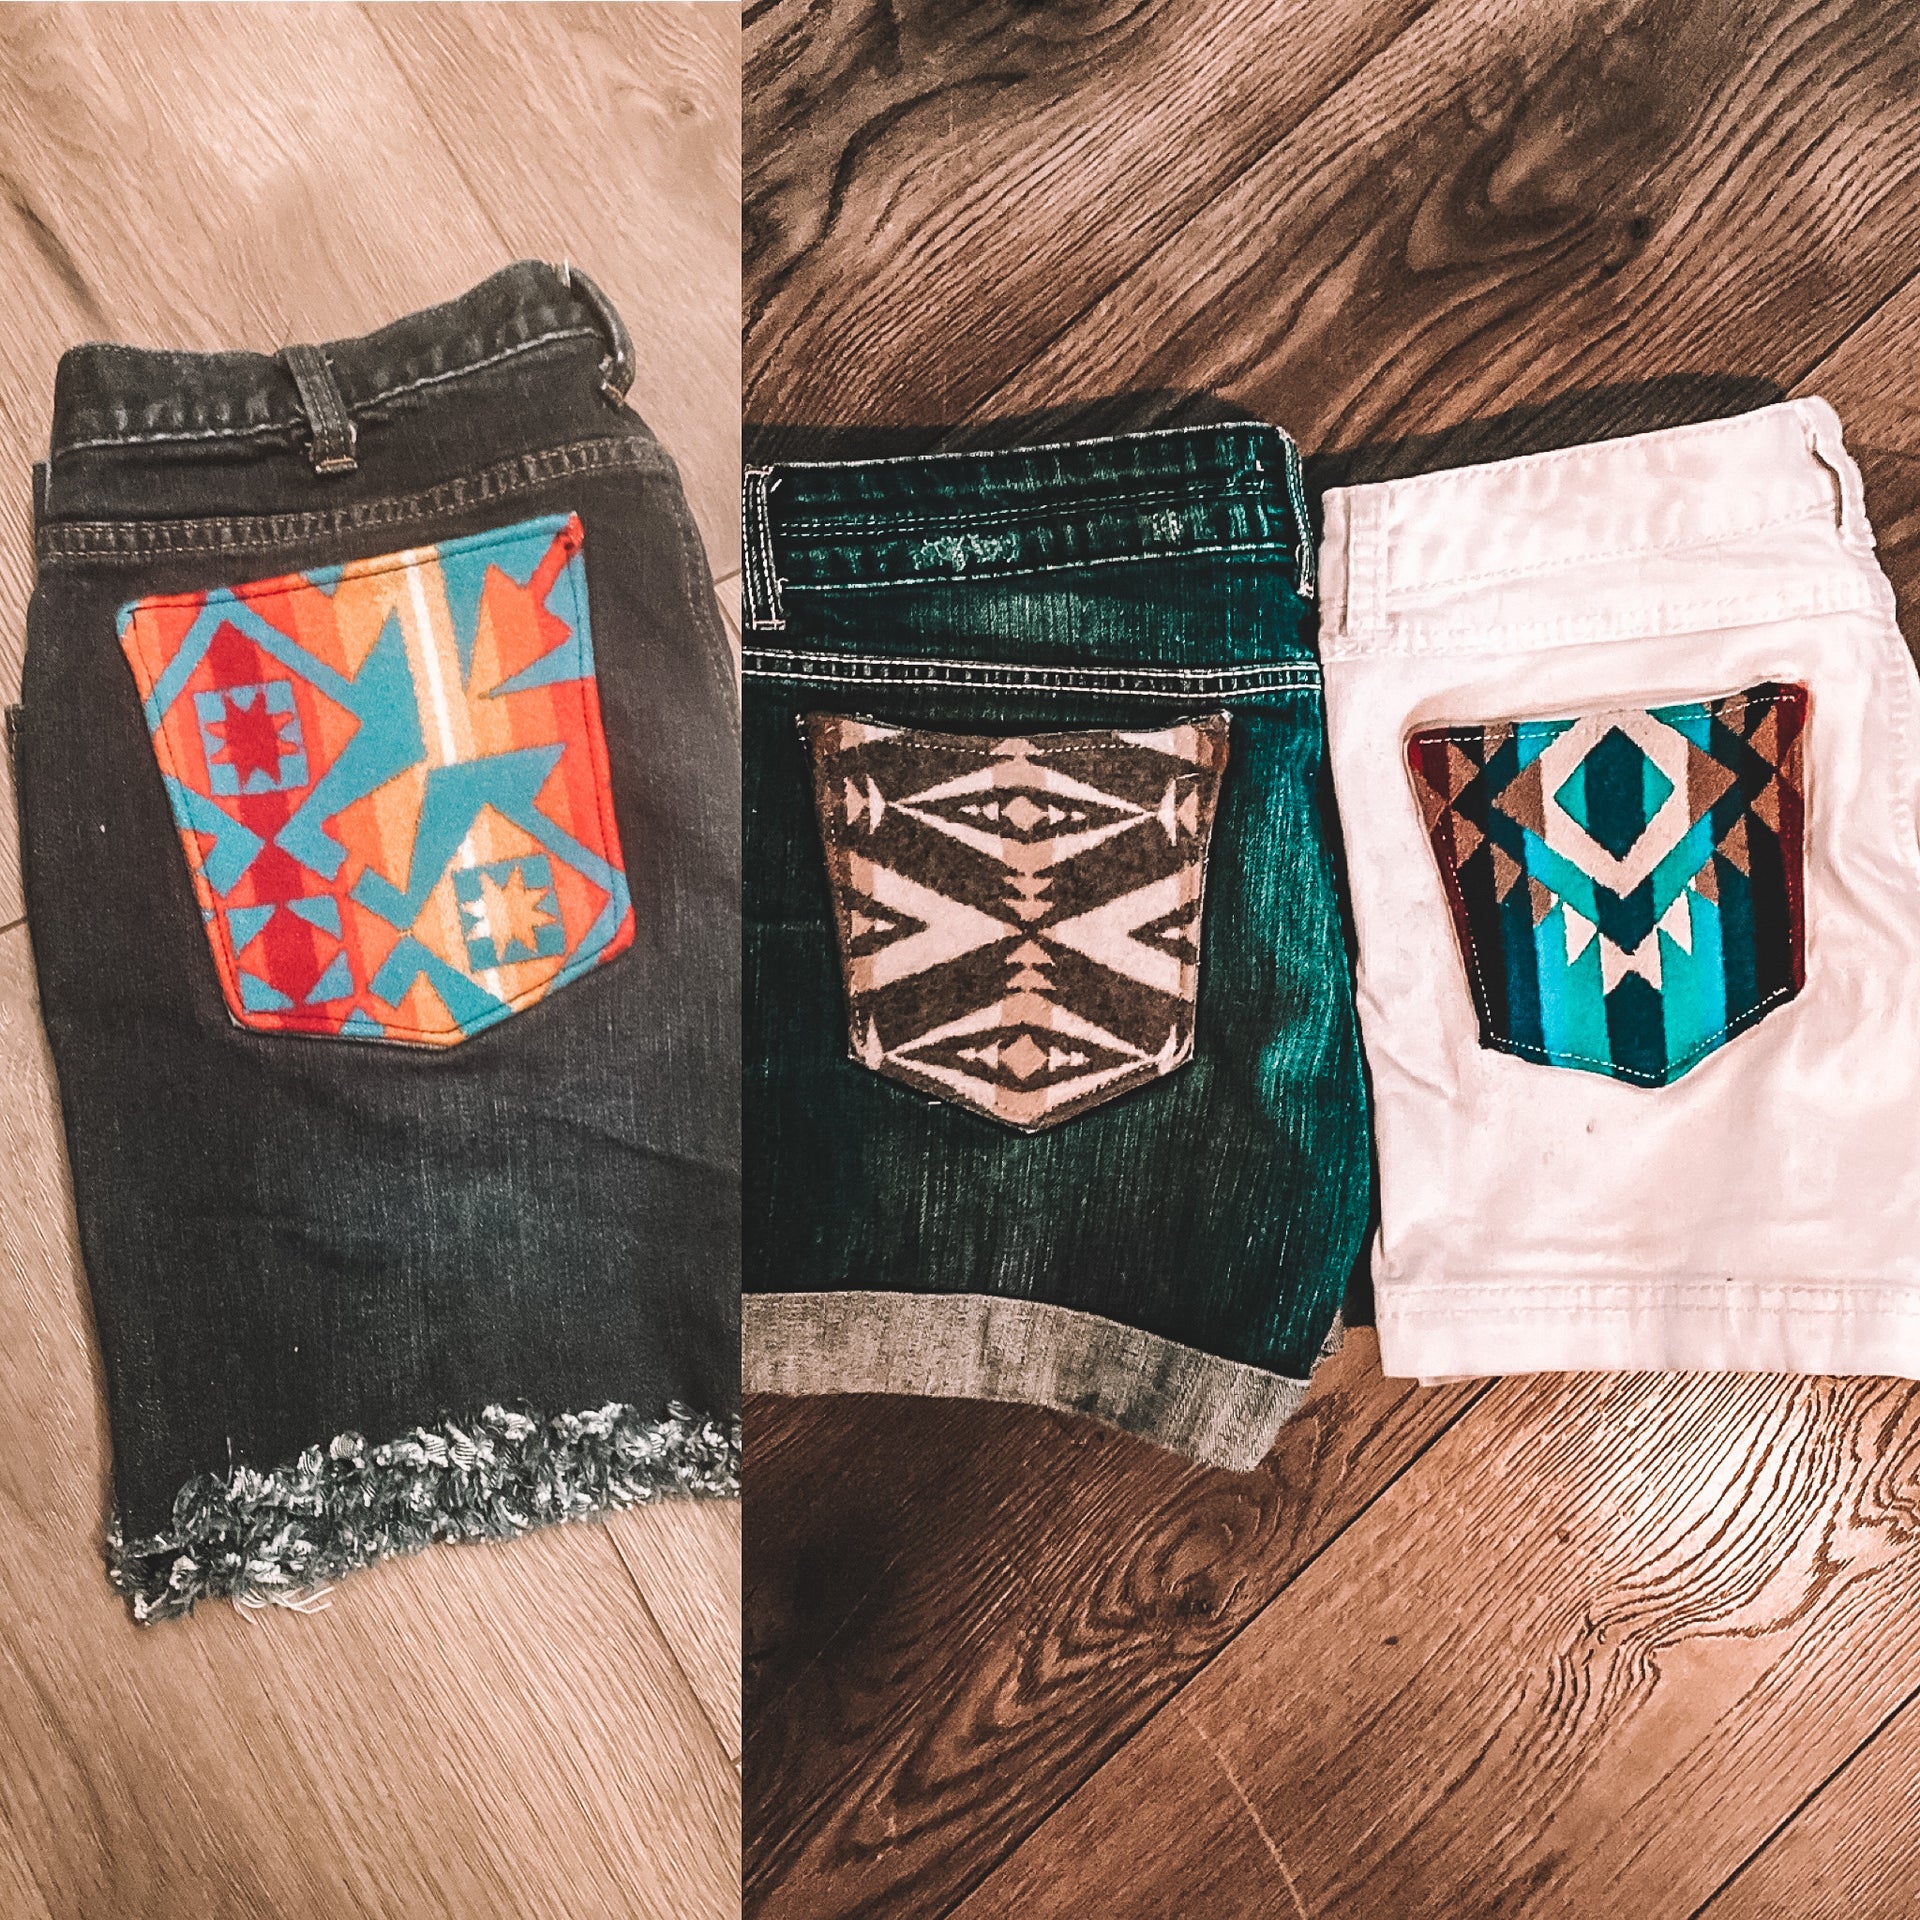 Load video: ☀️Customize your shorts in time for summer☀️